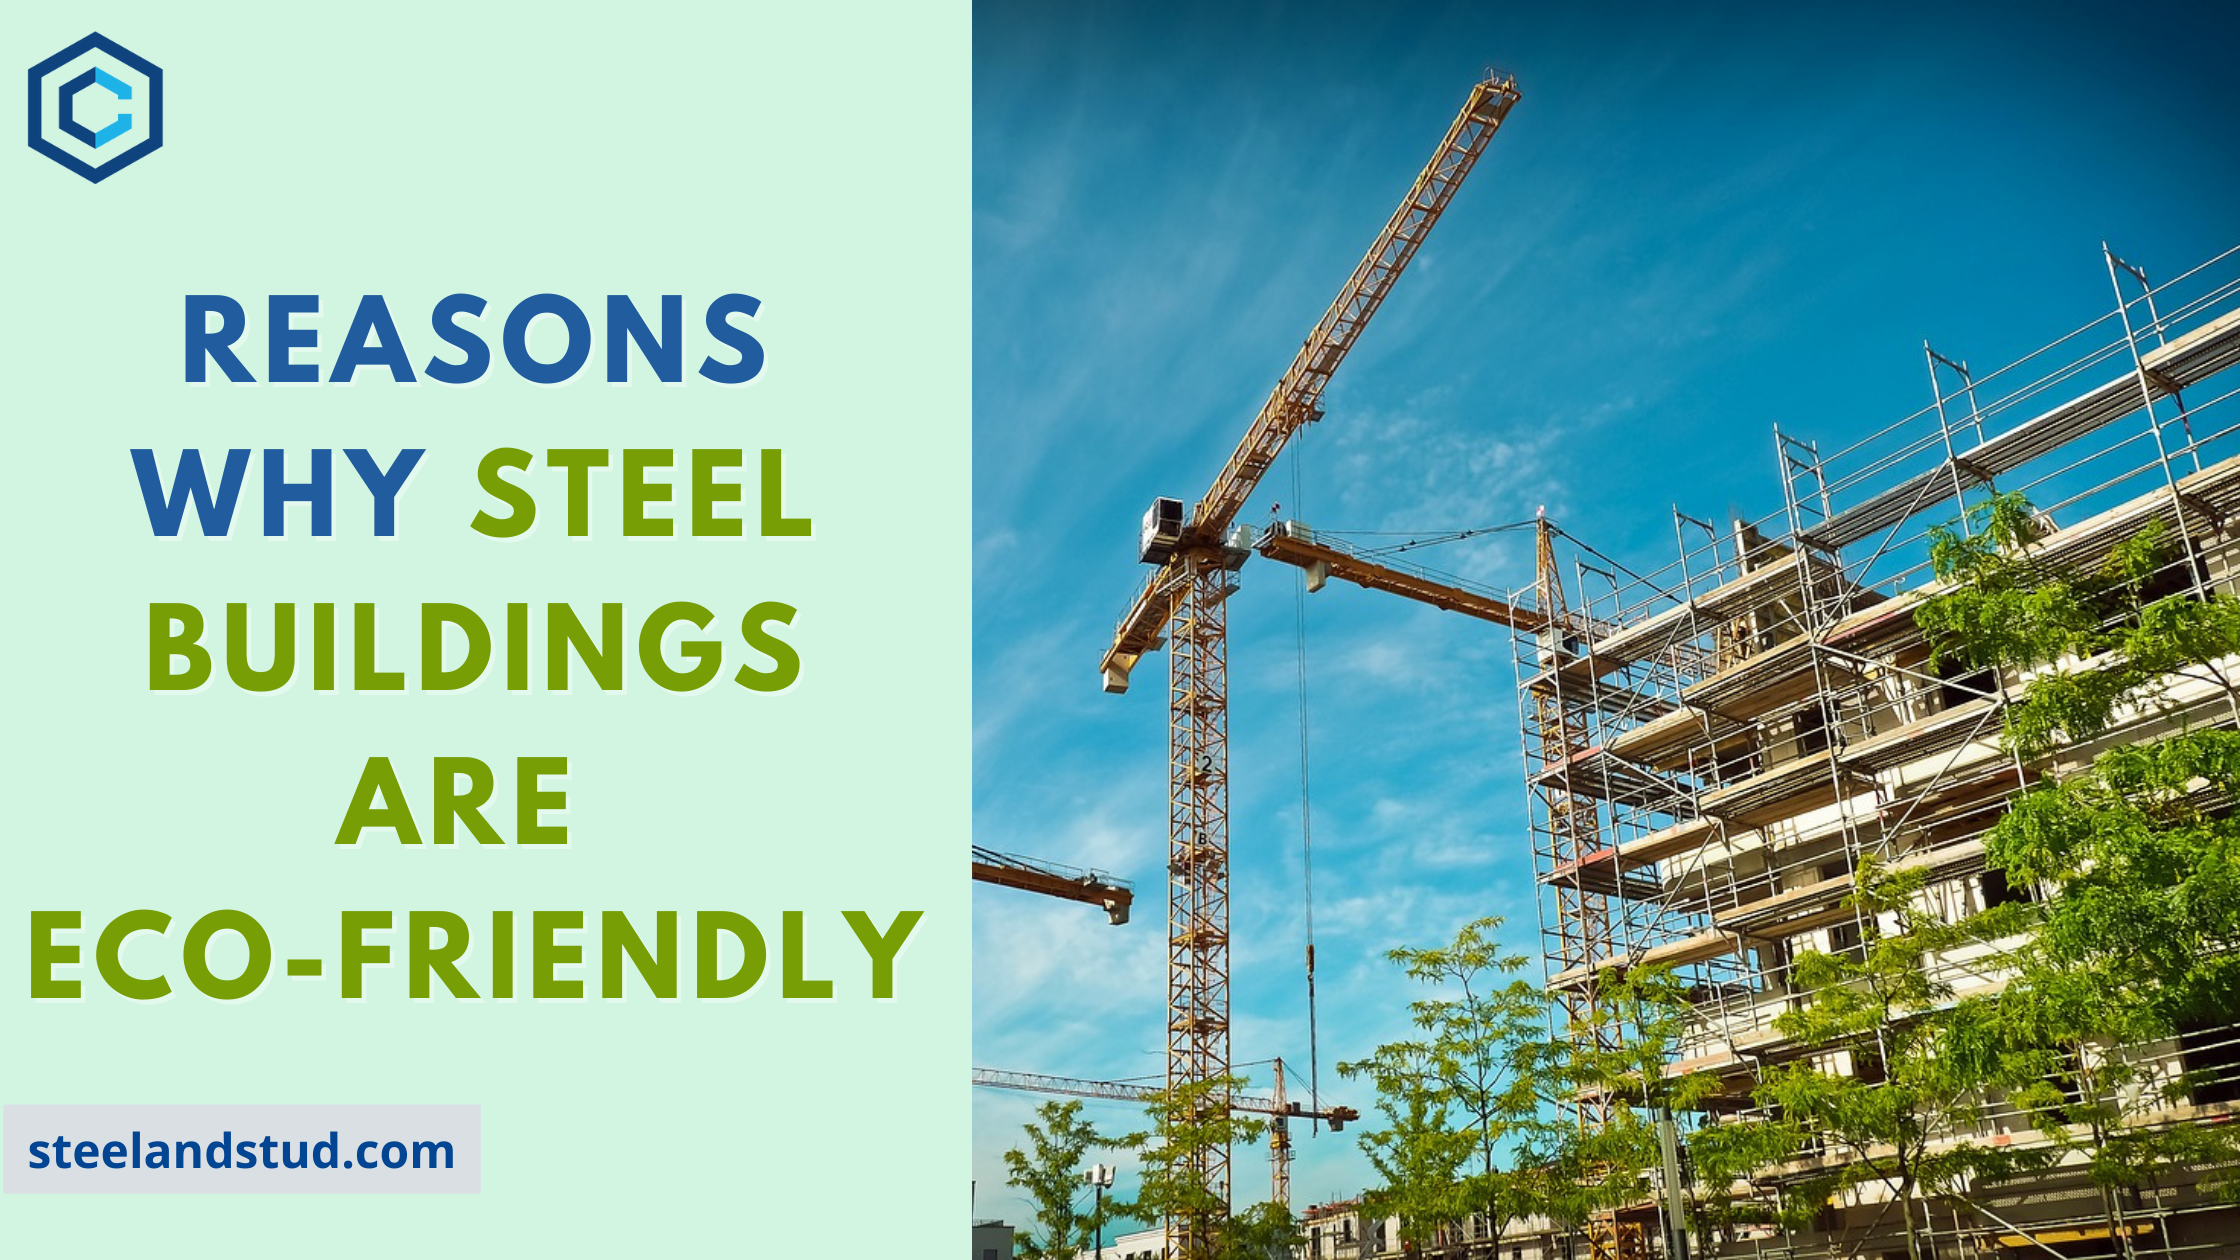 Reasons Why Steel Buildings Are Eco-Friendly